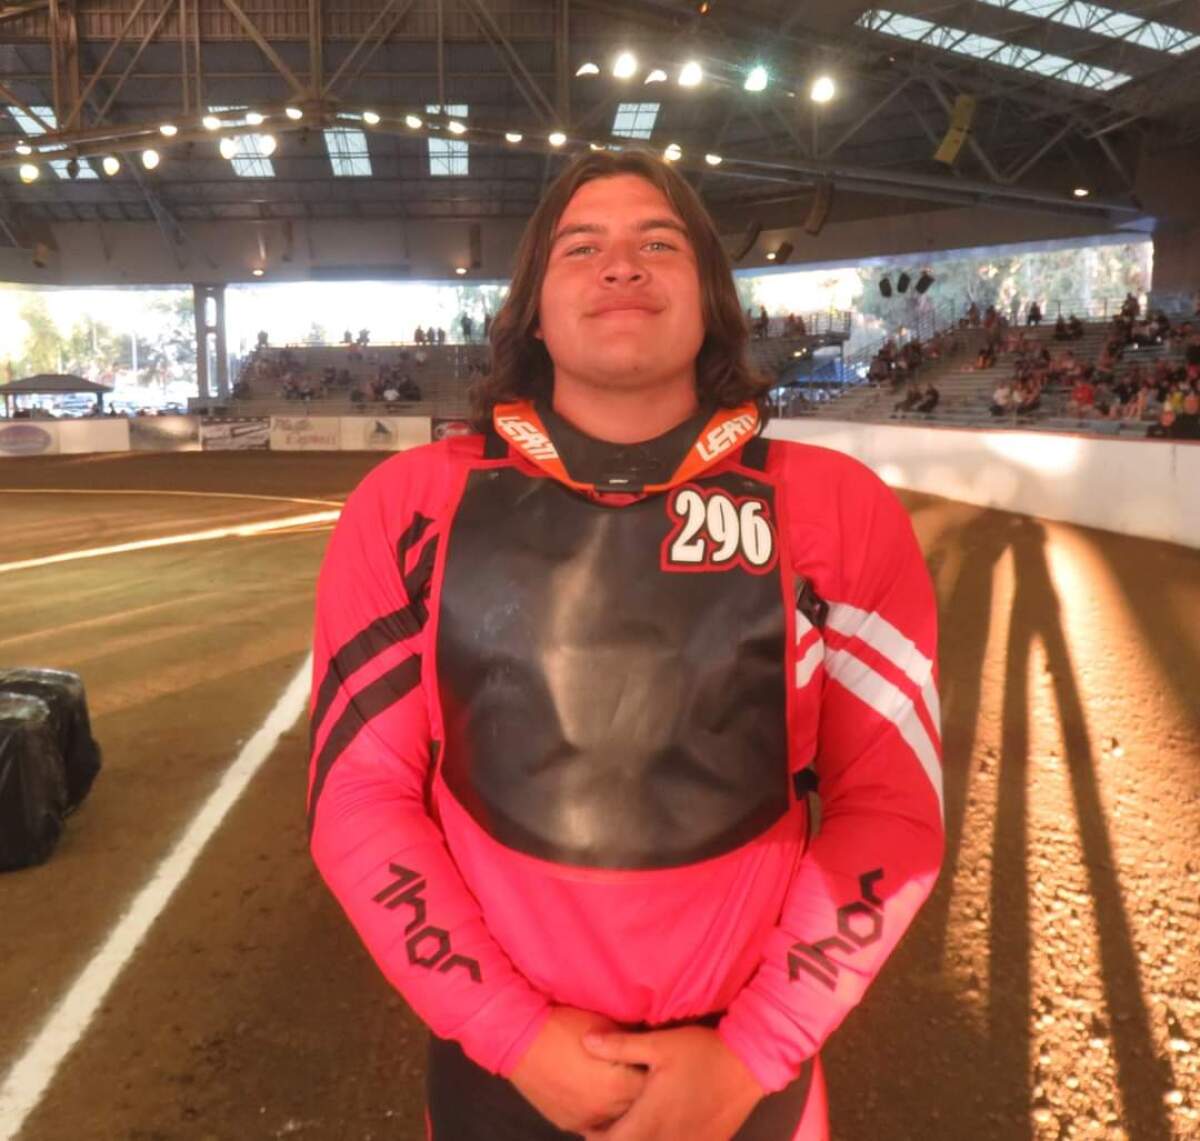 Peninsula High lineman Andrew Russell has been competing in dirt bike racing since he was young